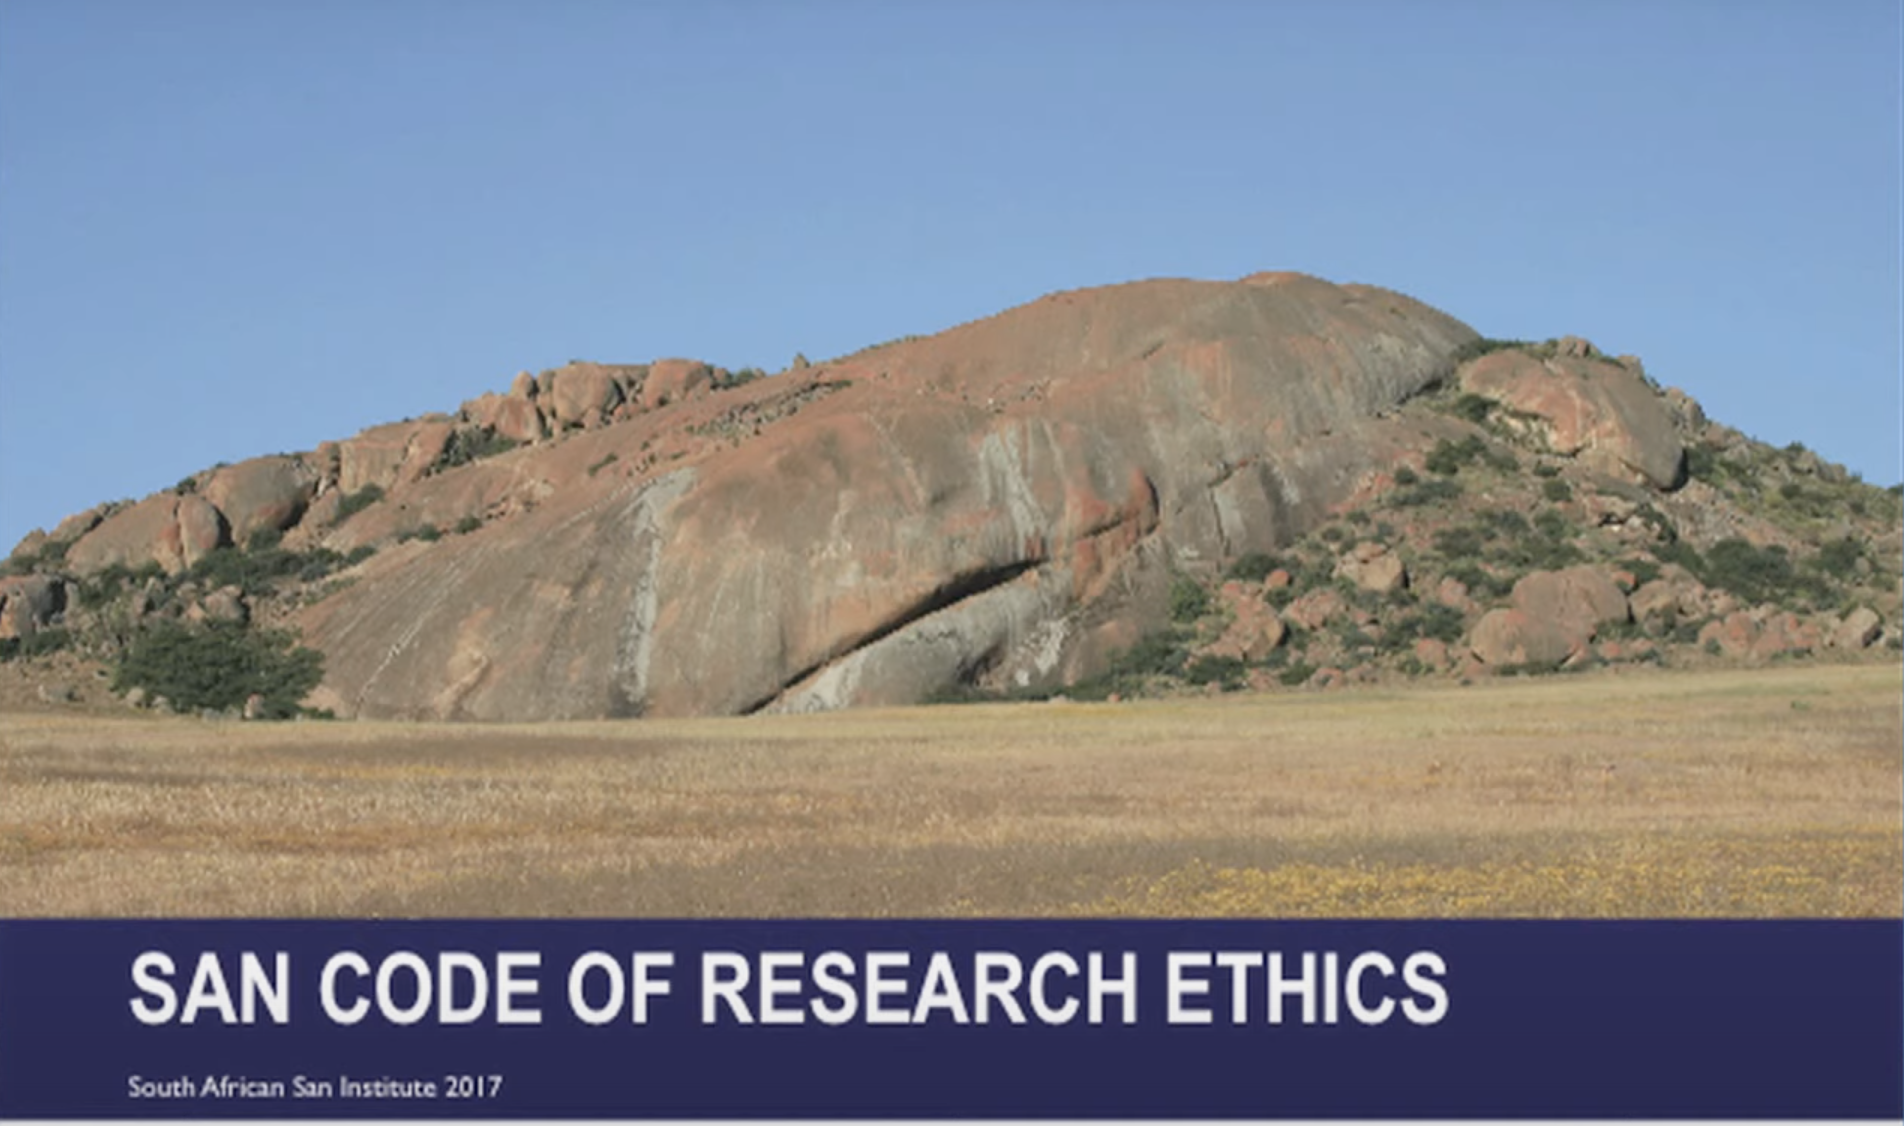 ‘Come through the door, not the window’: The San Code of Research Ethics (San Code)